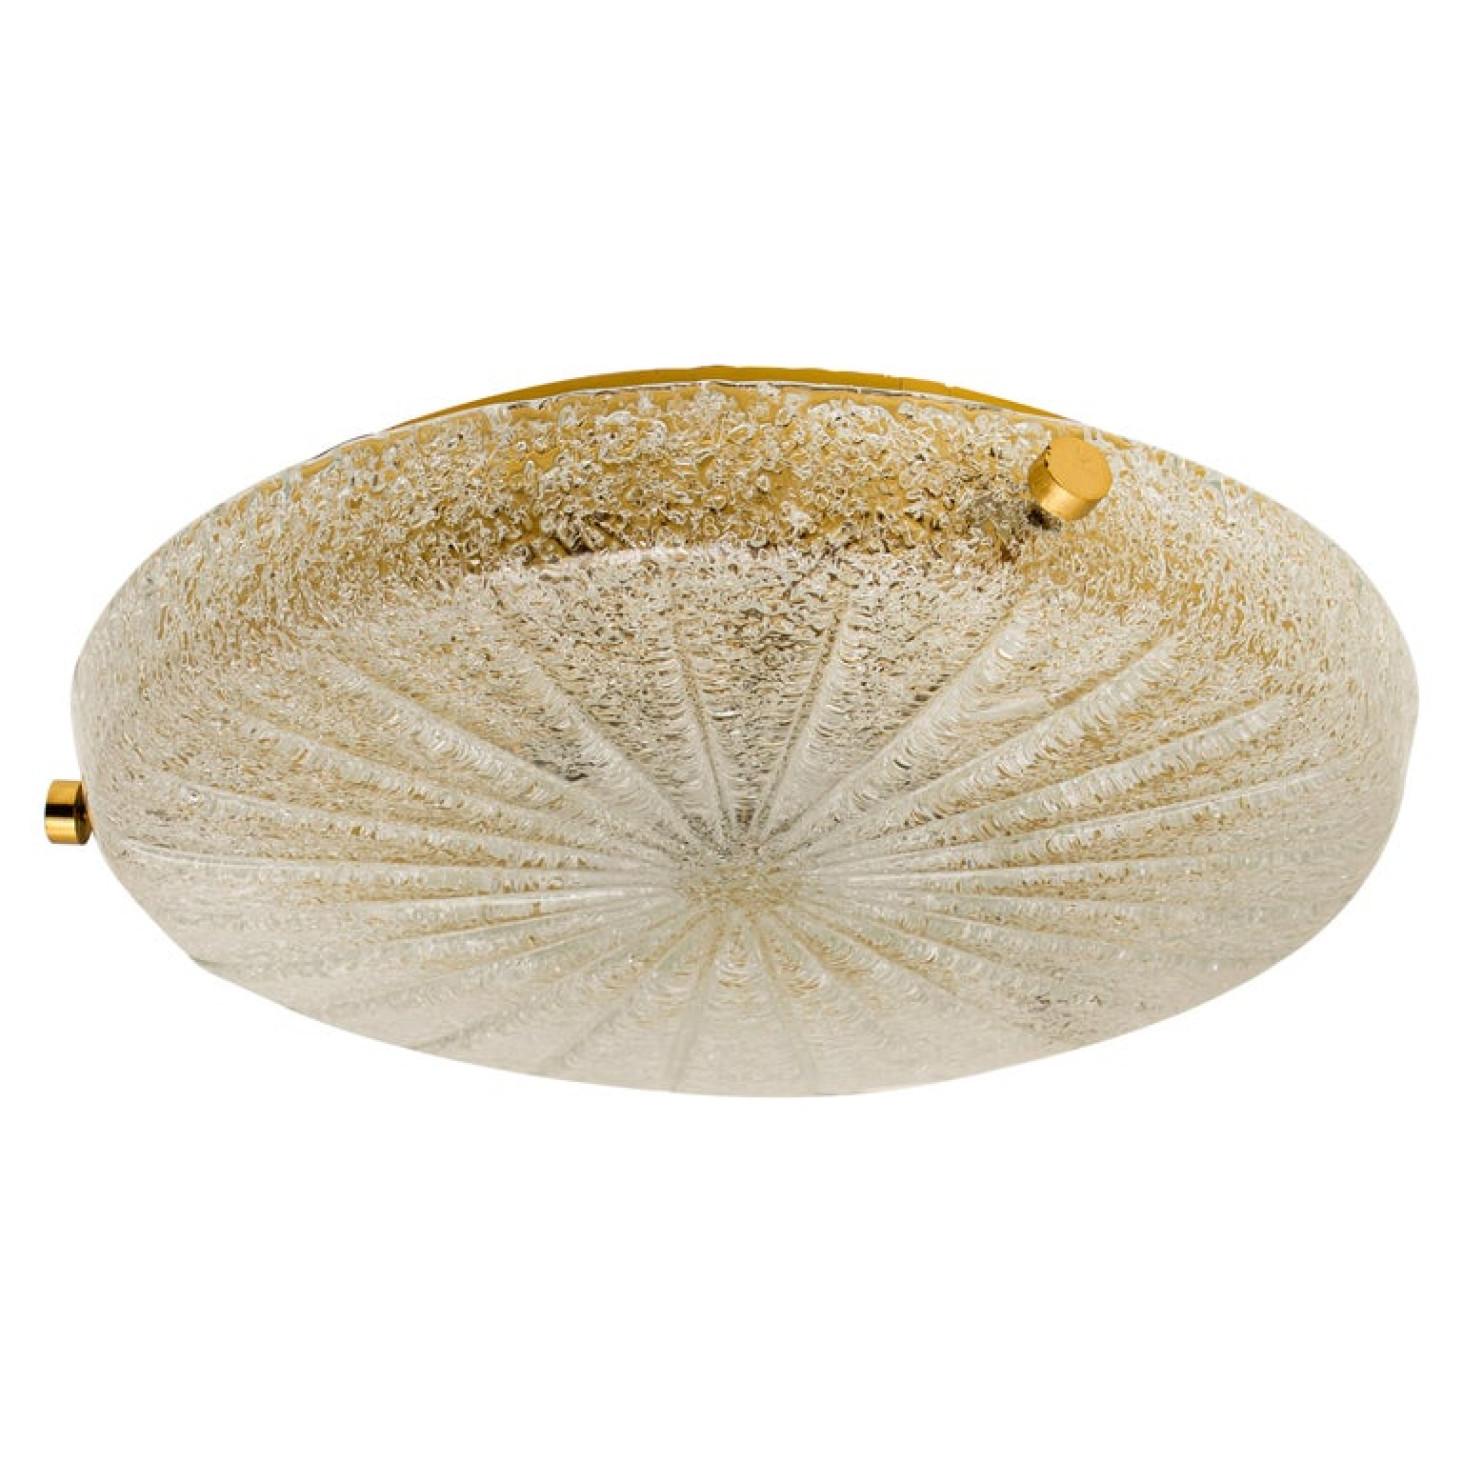 1 of the 2 high quality modern thick textured ice glass flush mount lights , circa 1965. Each flush mount is featuring a impressive huge round handmade glass dish.

Can also work for impressive wall lights. Al

The dish is handmade of 'Frit' glass.